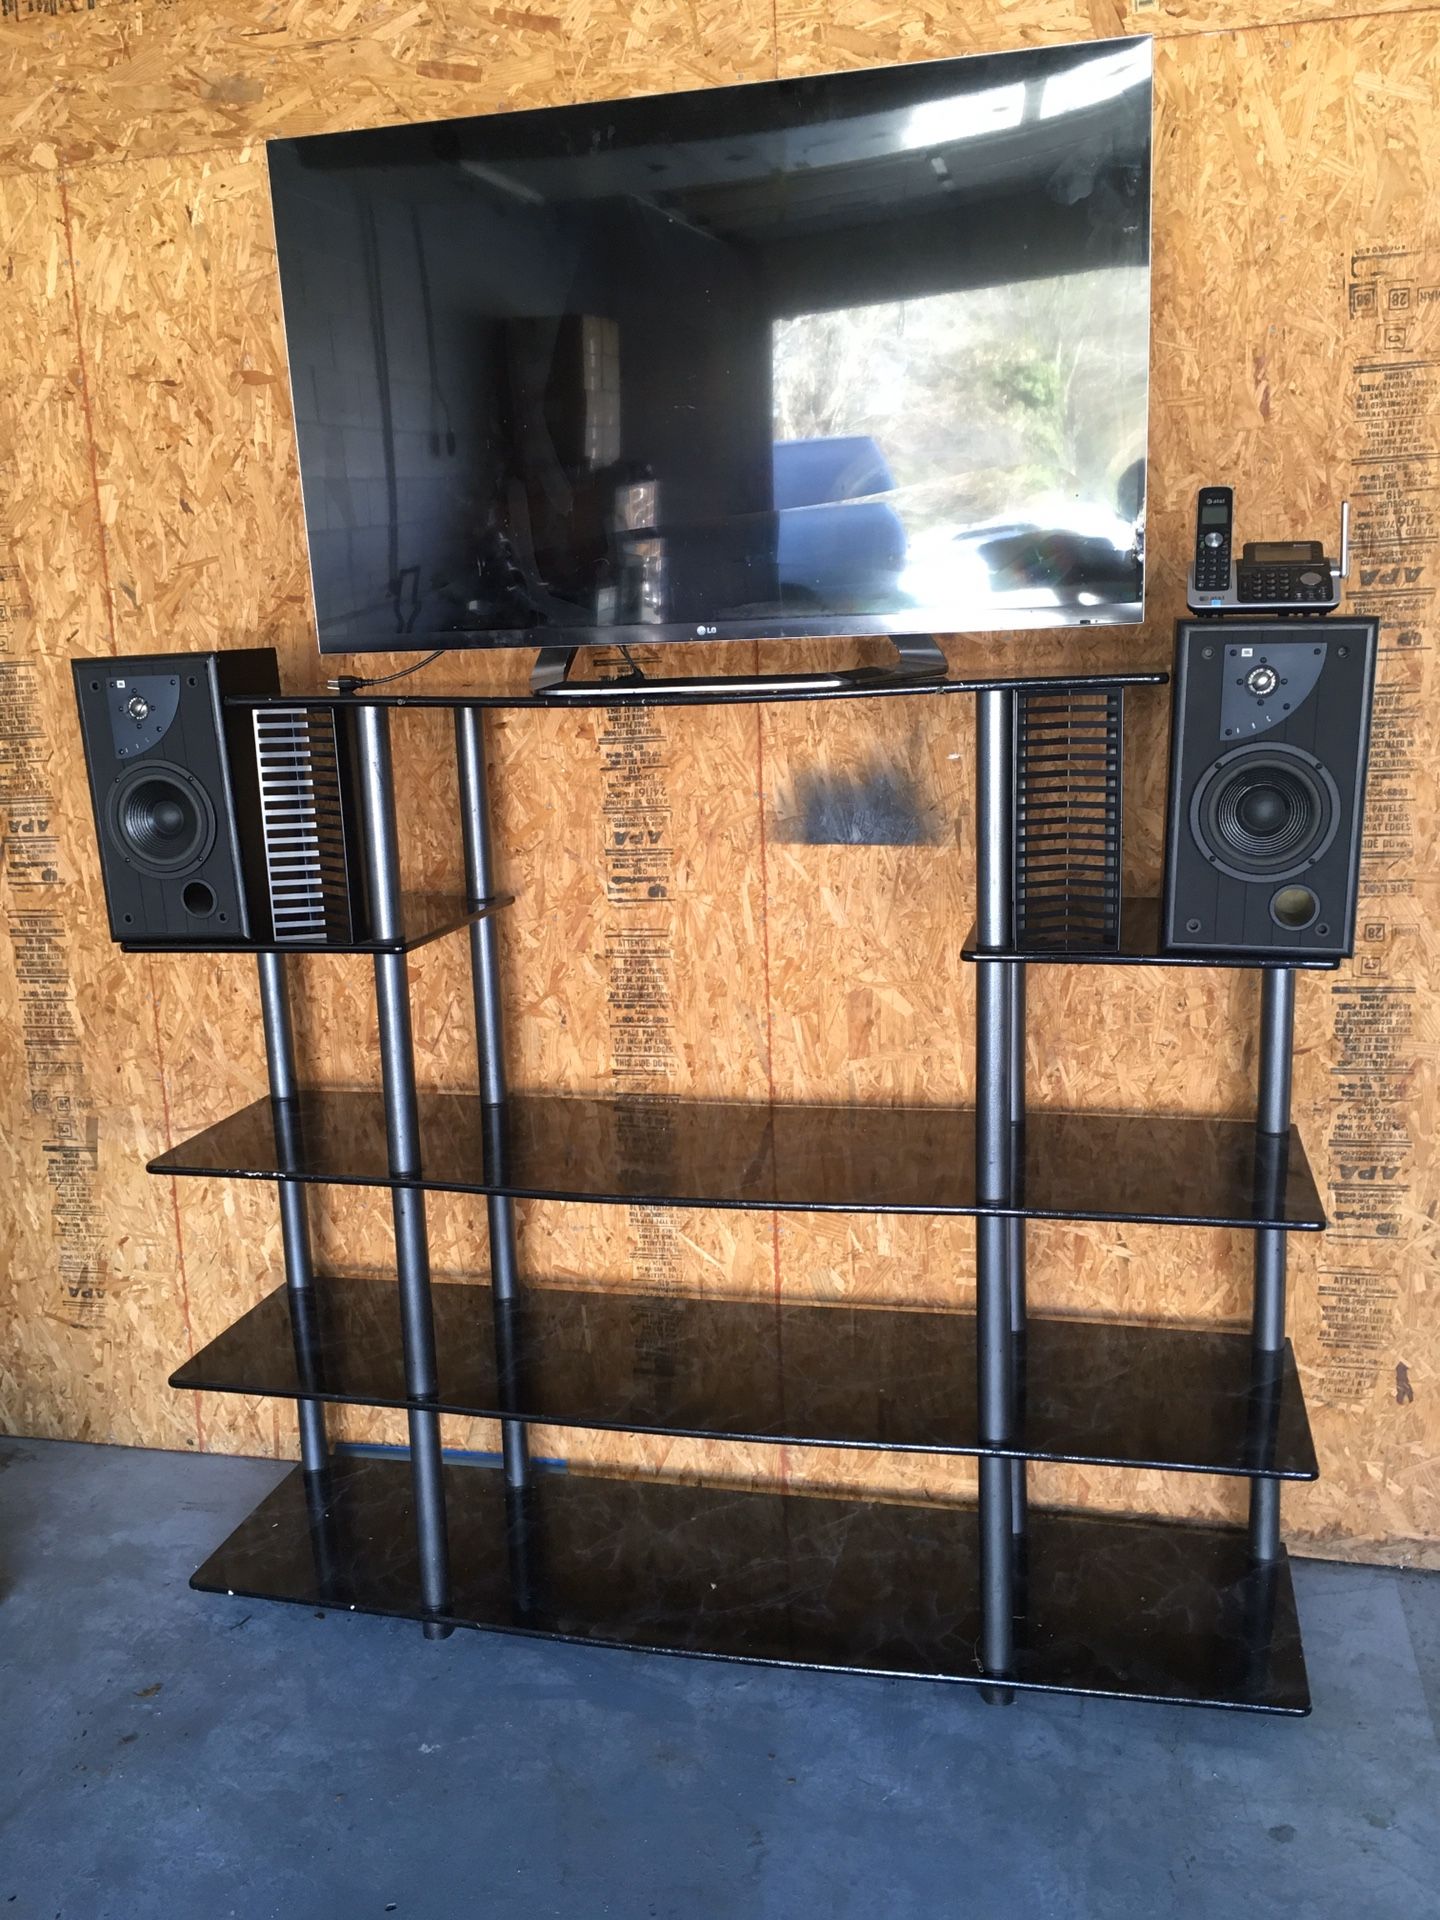 5 FT TALL USED TV STAND PLUS SPEAKERS FOR SALE!